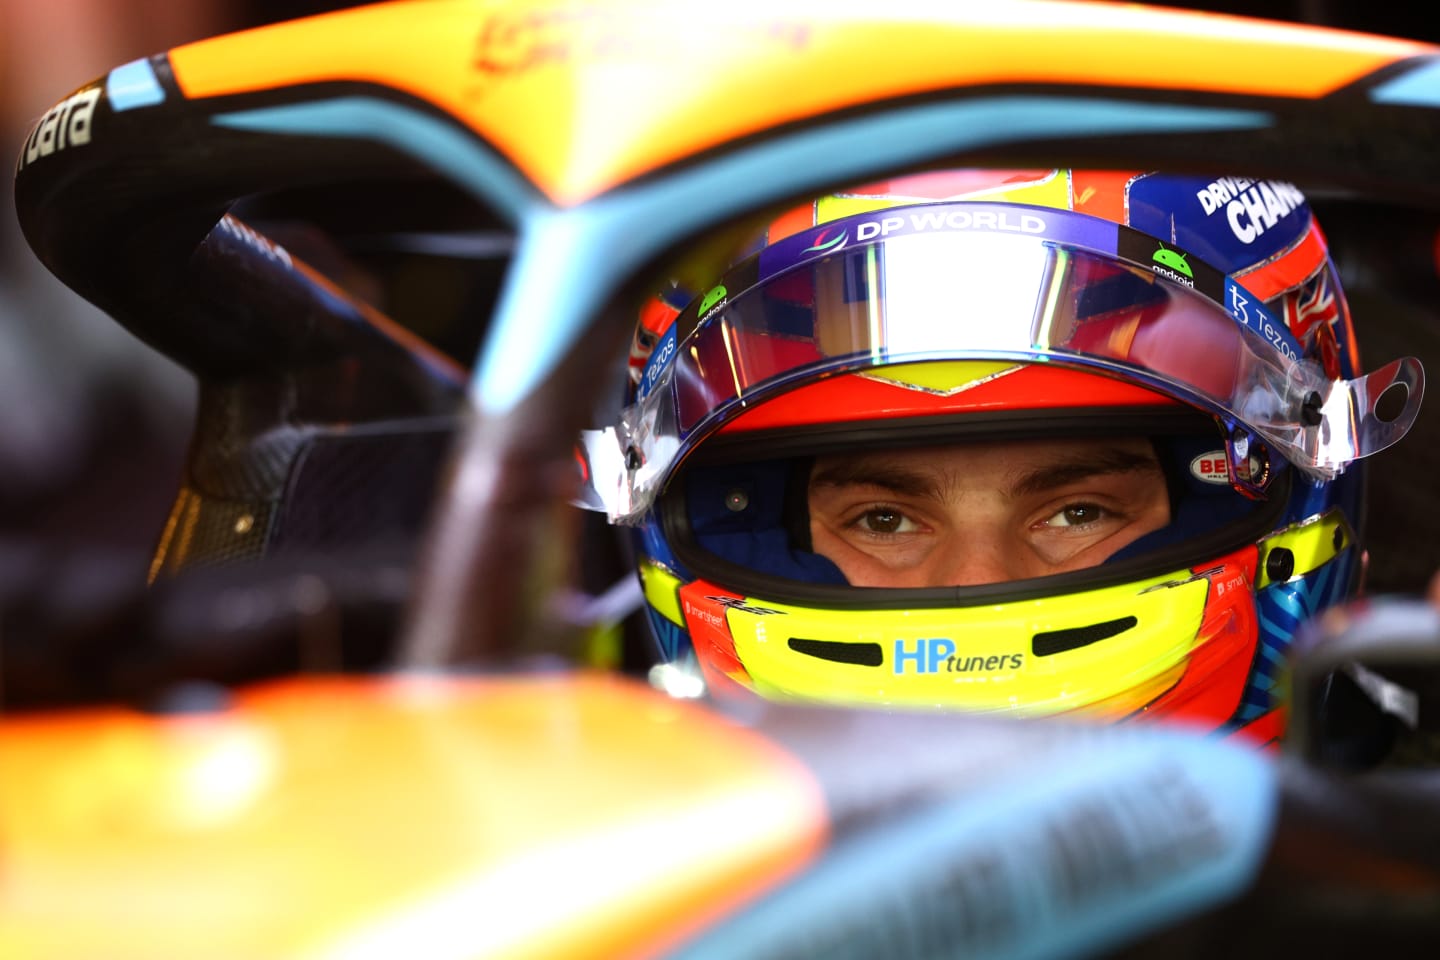 ABU DHABI, UNITED ARAB EMIRATES - NOVEMBER 24: Oscar Piastri of Australia and McLaren prepares to drive in the garage during practice ahead of the F1 Grand Prix of Abu Dhabi at Yas Marina Circuit on November 24, 2023 in Abu Dhabi, United Arab Emirates. (Photo by Clive Rose/Getty Images)